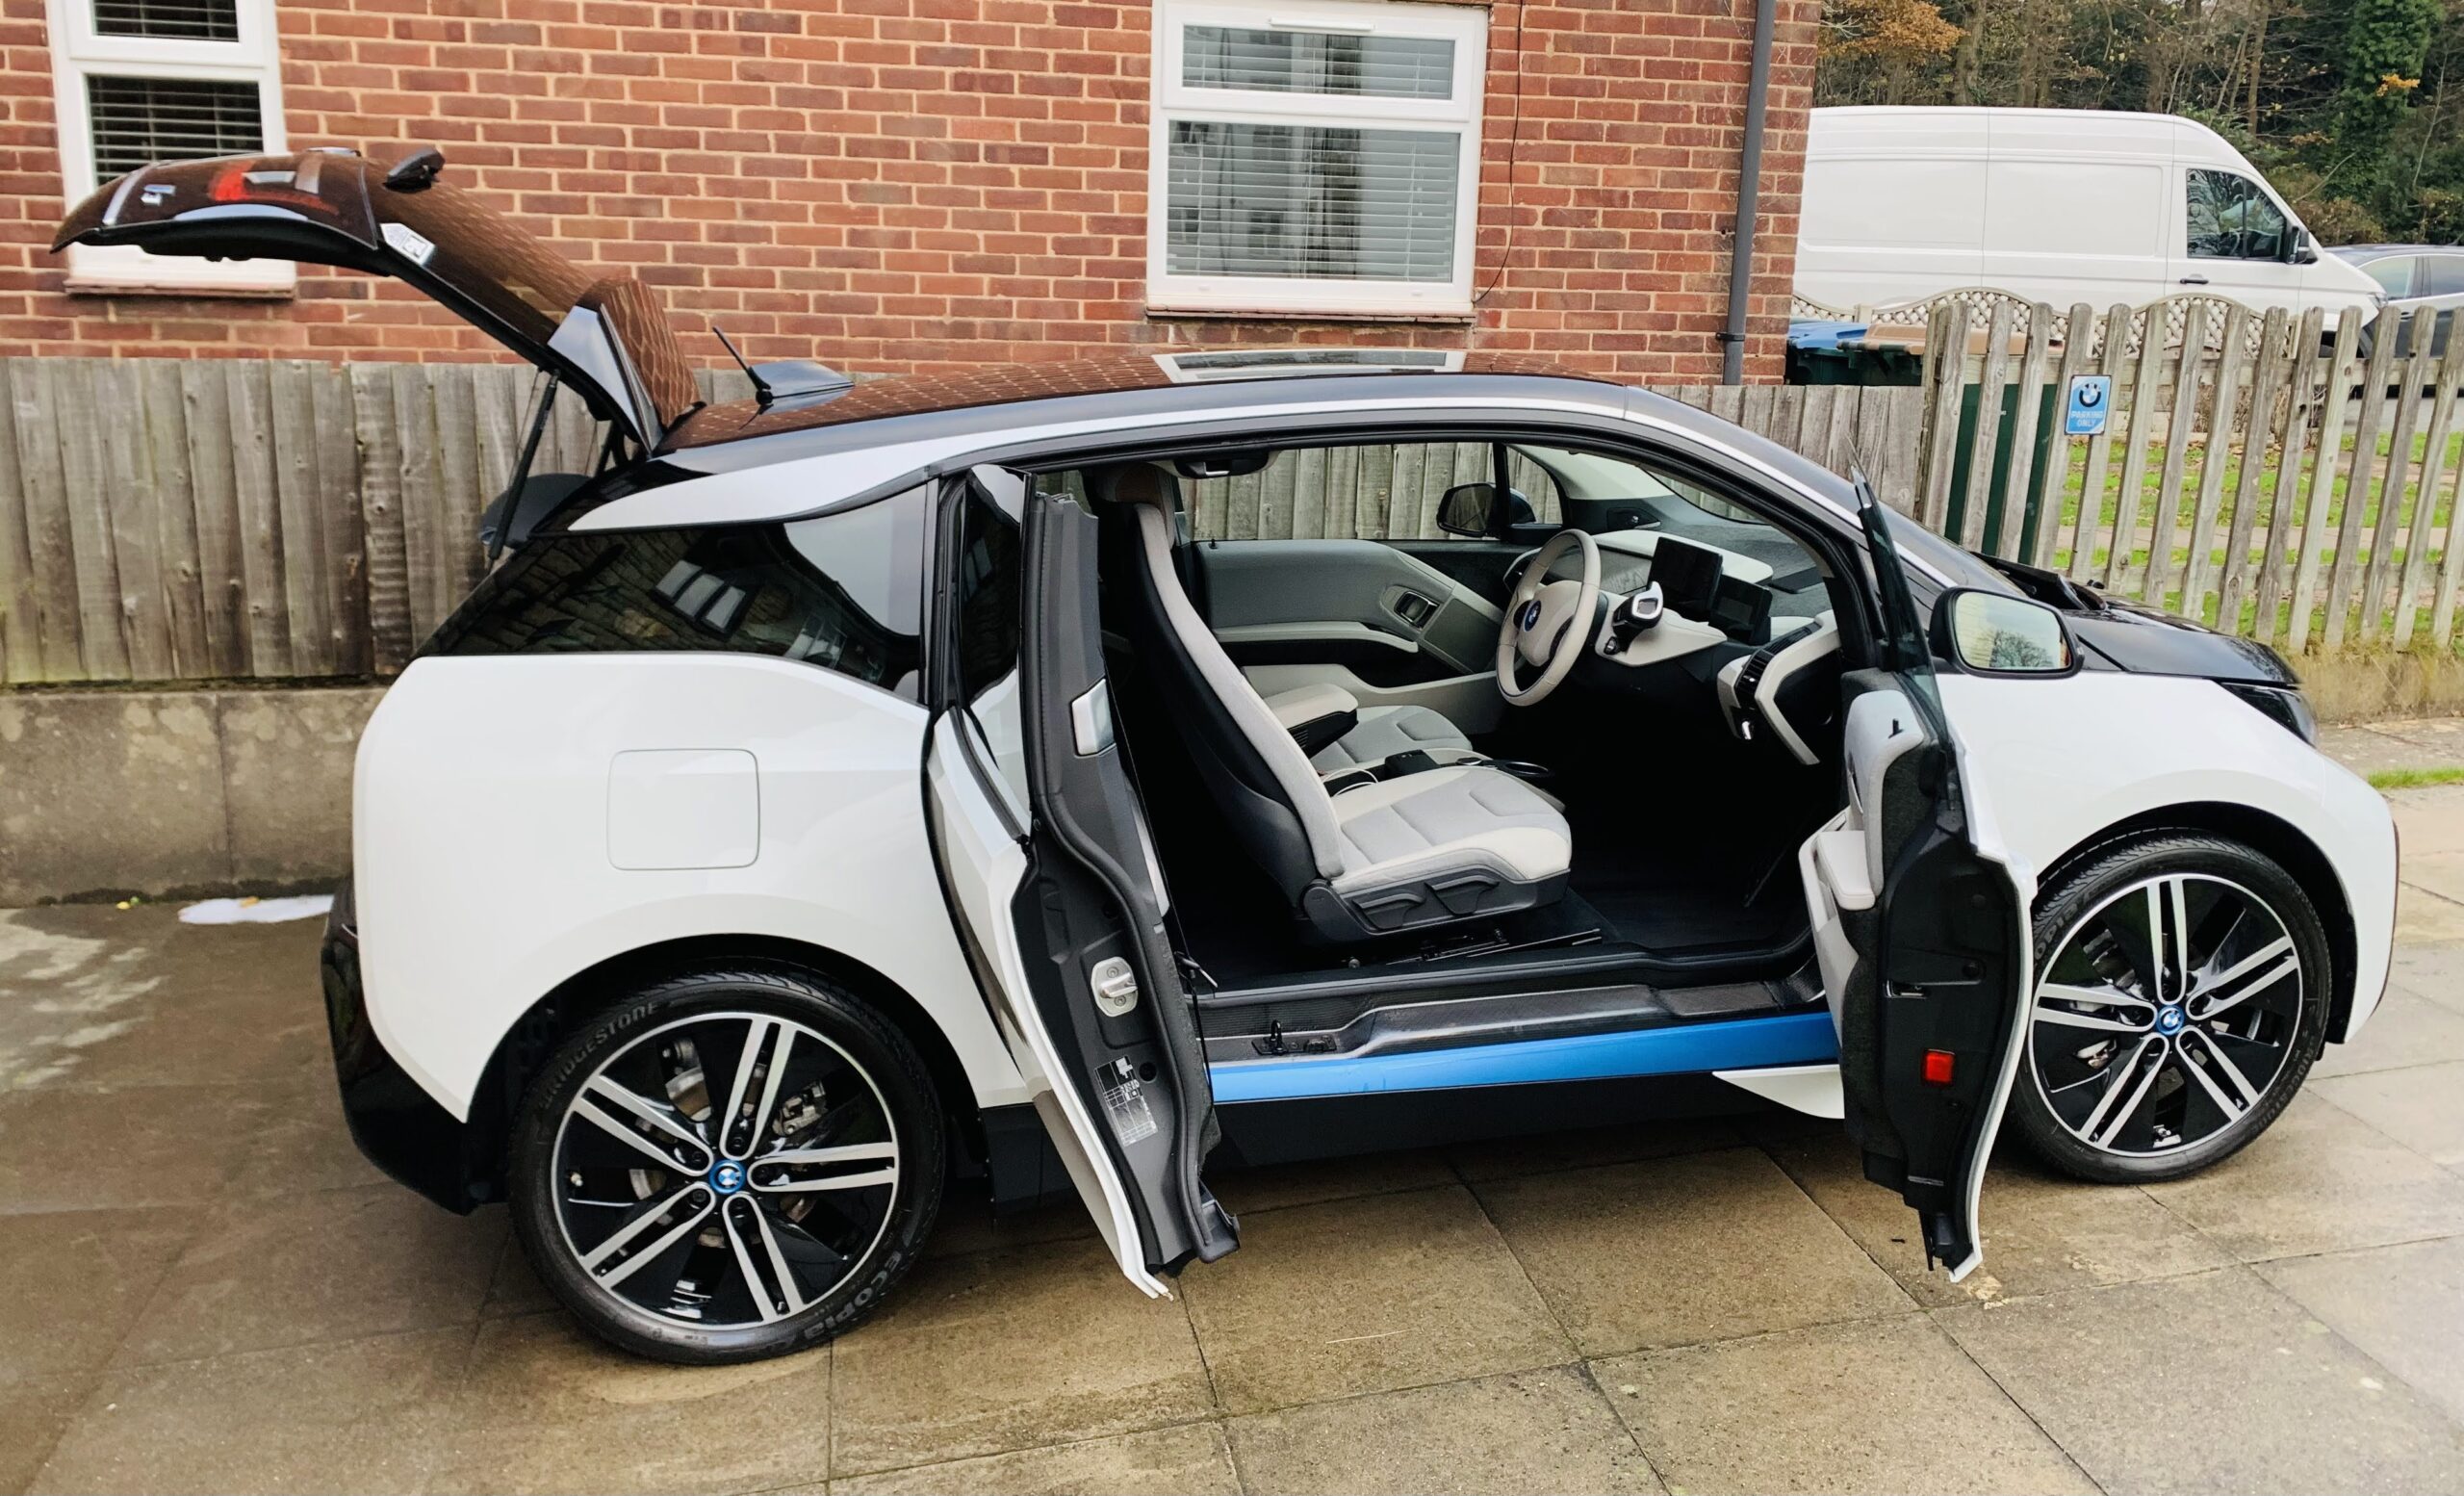 Going electric: A year in the life of a BMW i3 owner by Neil Allison